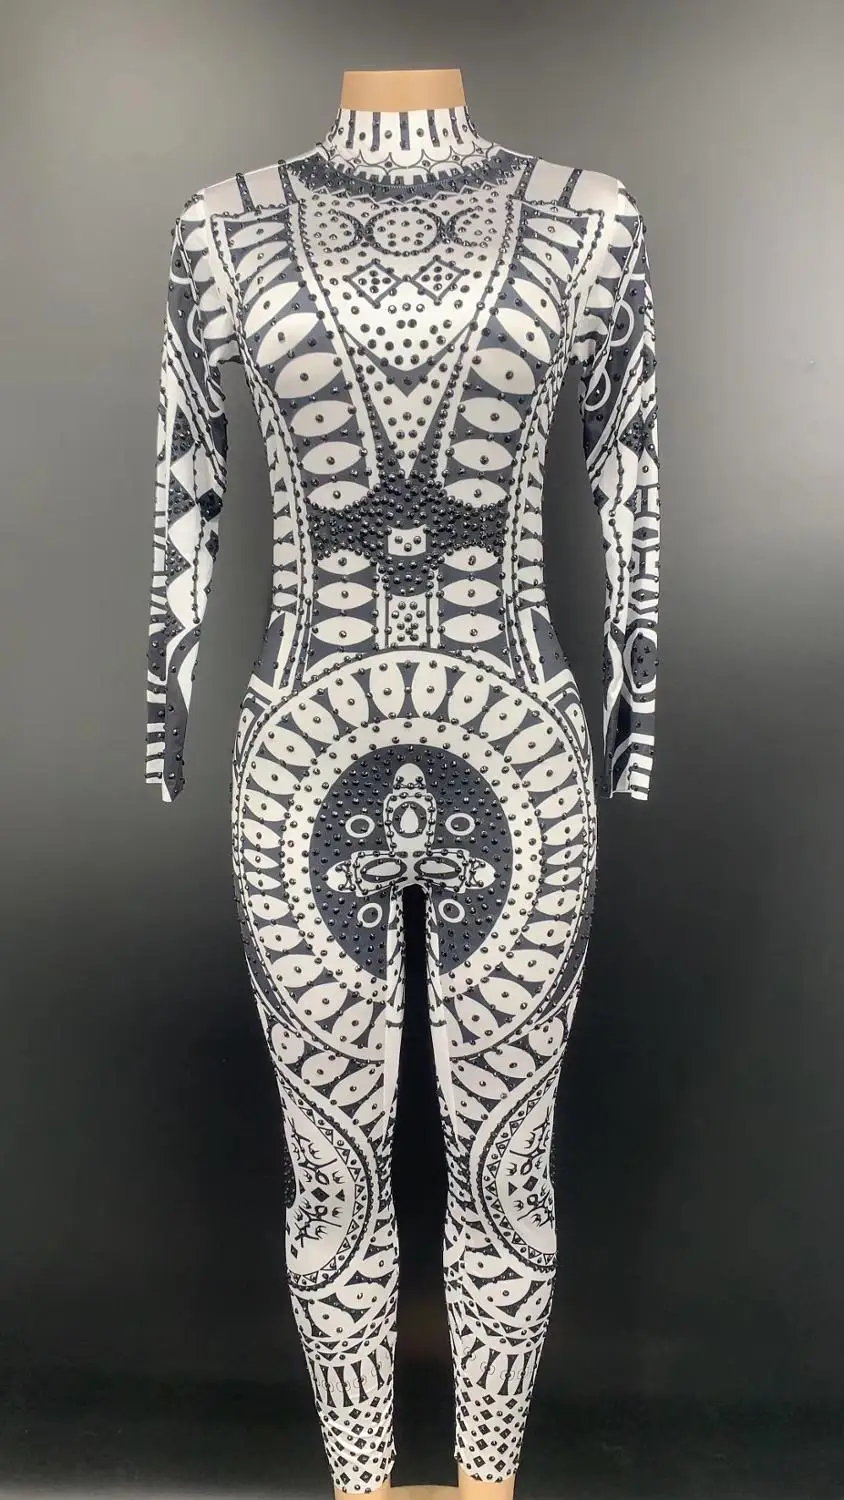 White Black Printed Rhinestones Spandex Jumpsuit Women Singer Dancer Celebrate Outfit Party Outfit Leggings